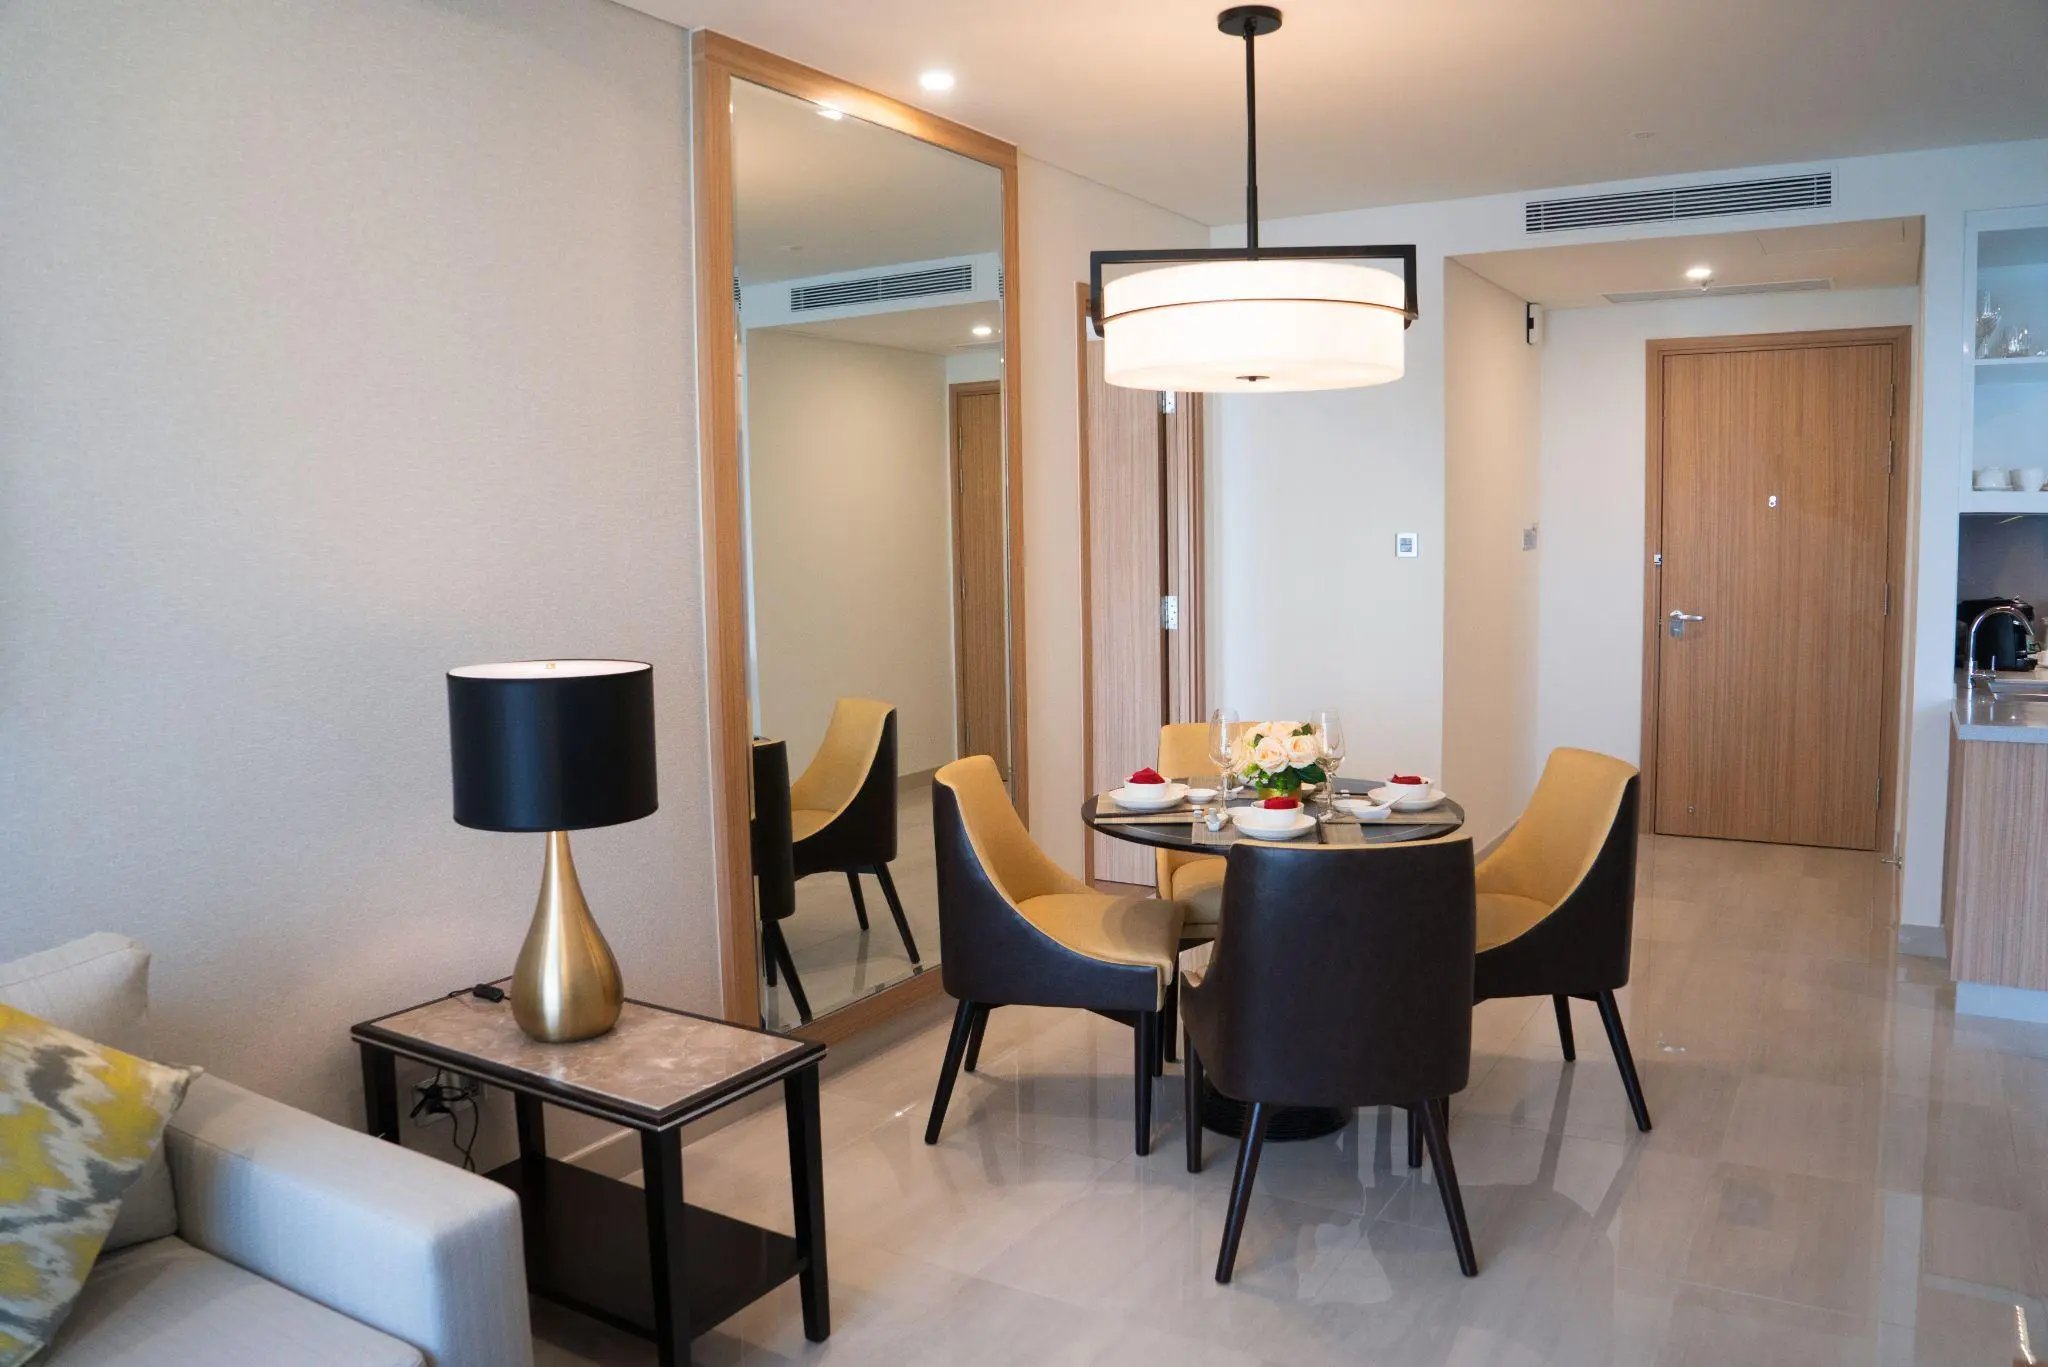 dining area of comfortable studio flat or hotel room.